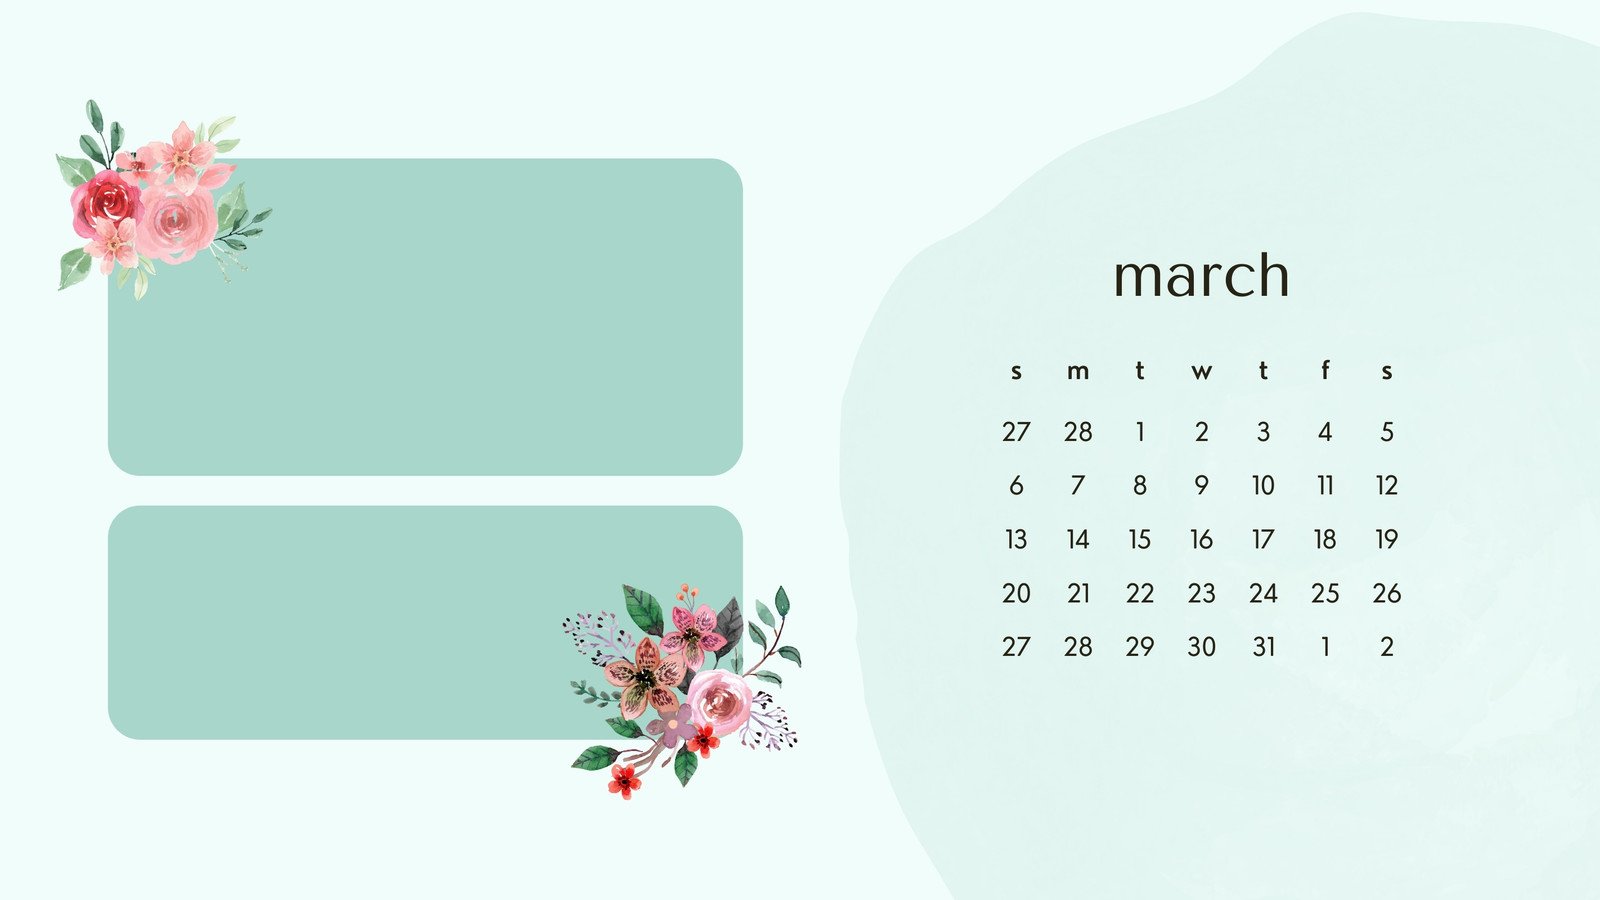 Aesthetic 2022 March calendar printable monthly planner iPhone wallpaper   free image by rawpixelcom  Sasi  Calendar wallpaper Calendar march  Phone wallpaper